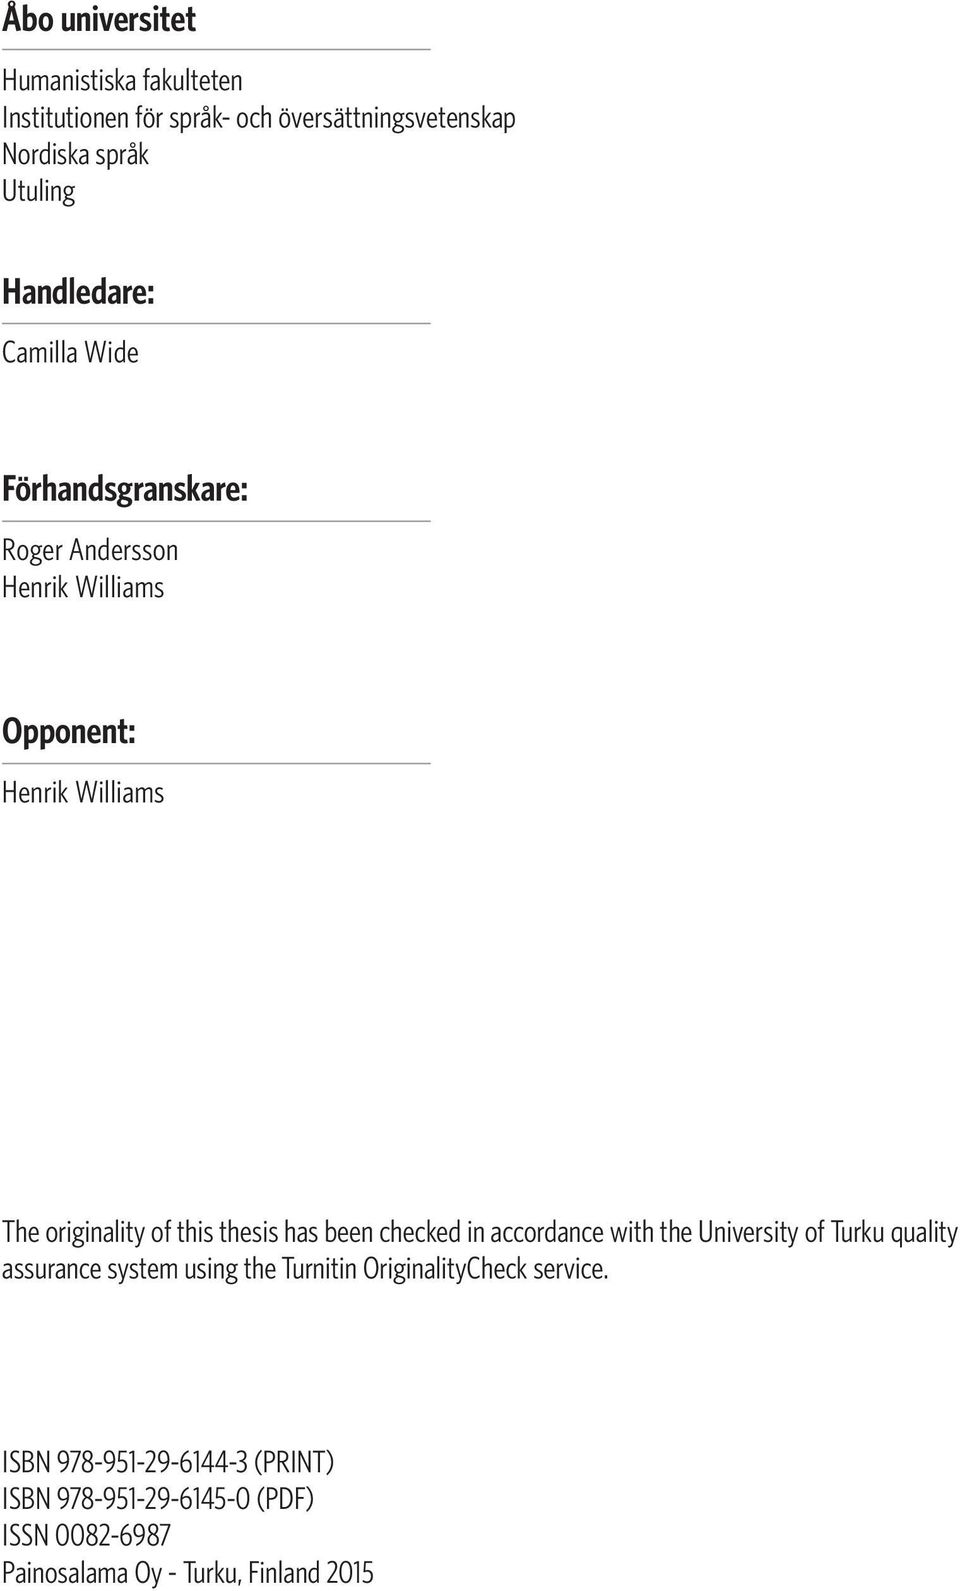 this thesis has been checked in accordance with the University of Turku quality assurance system using the Turnitin